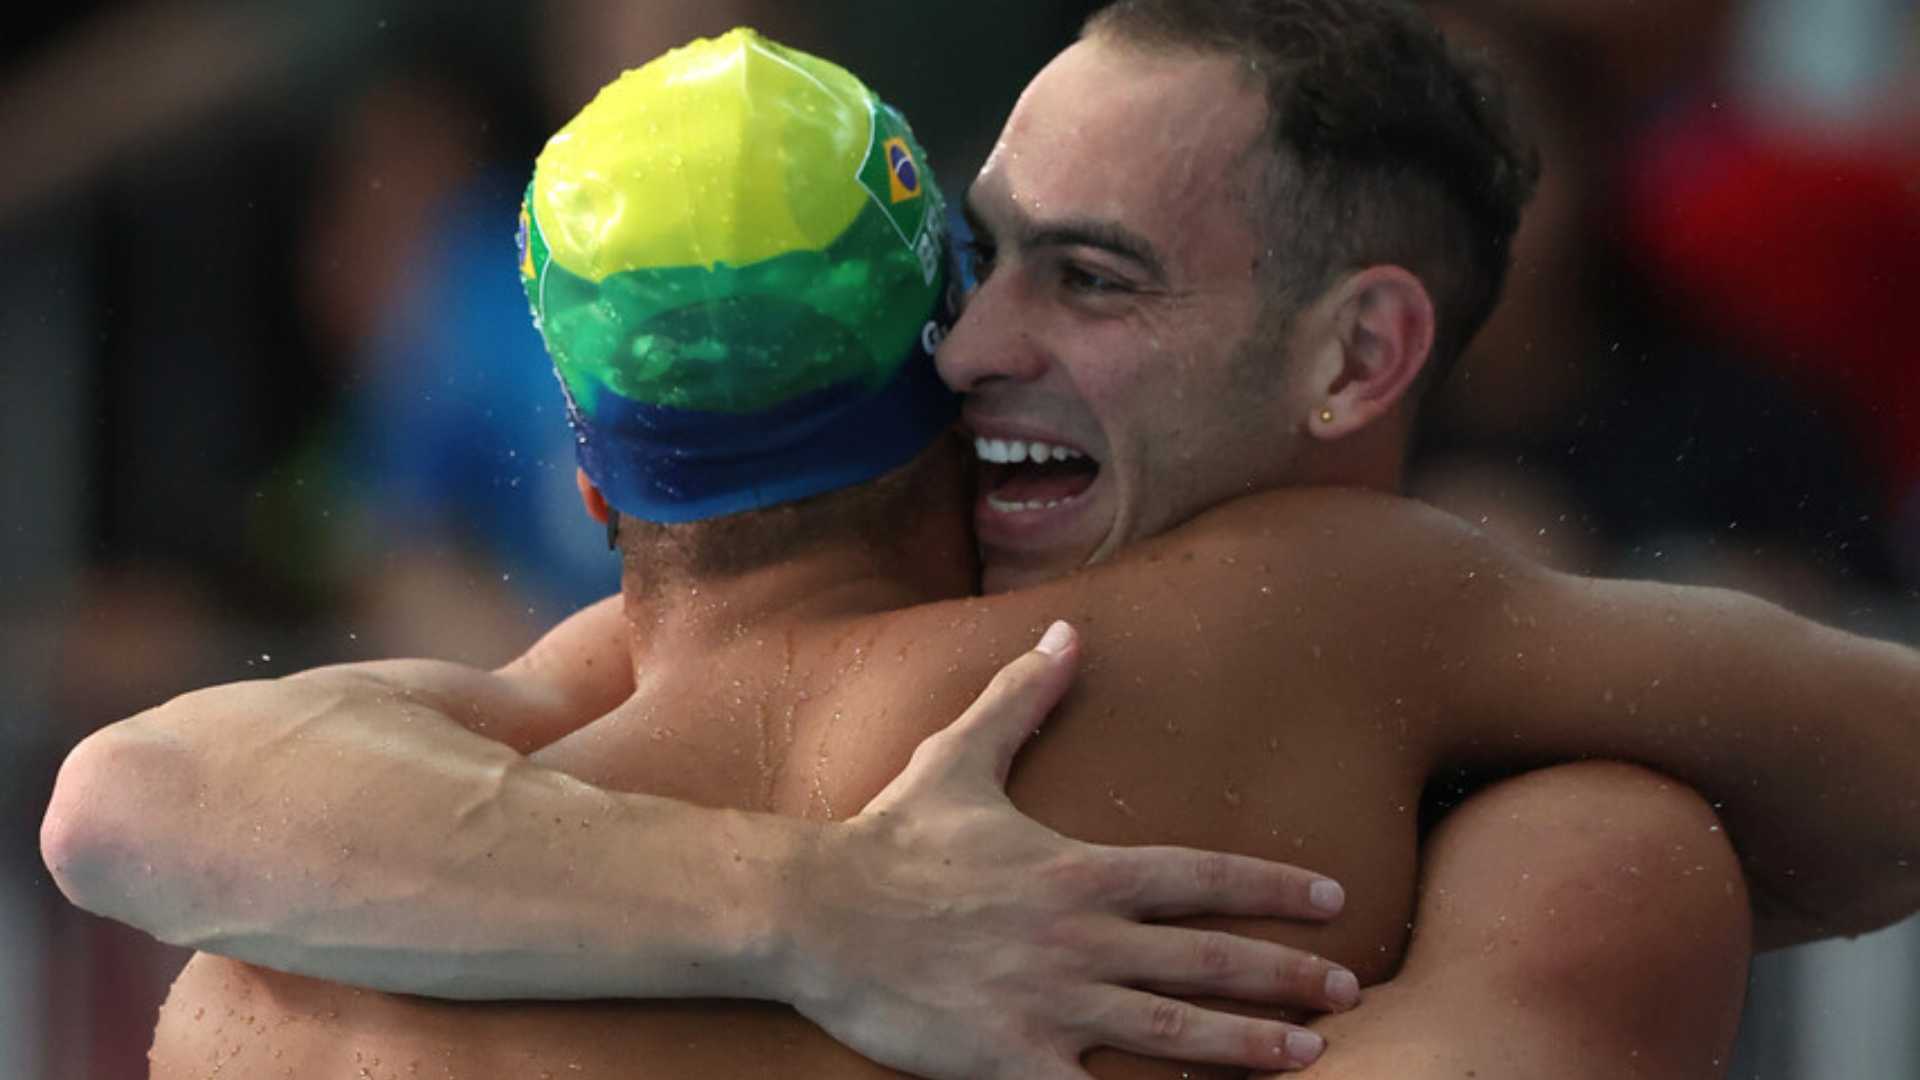 Guilherme Costa fulfills his mission: wins fourth gold medal in swimming